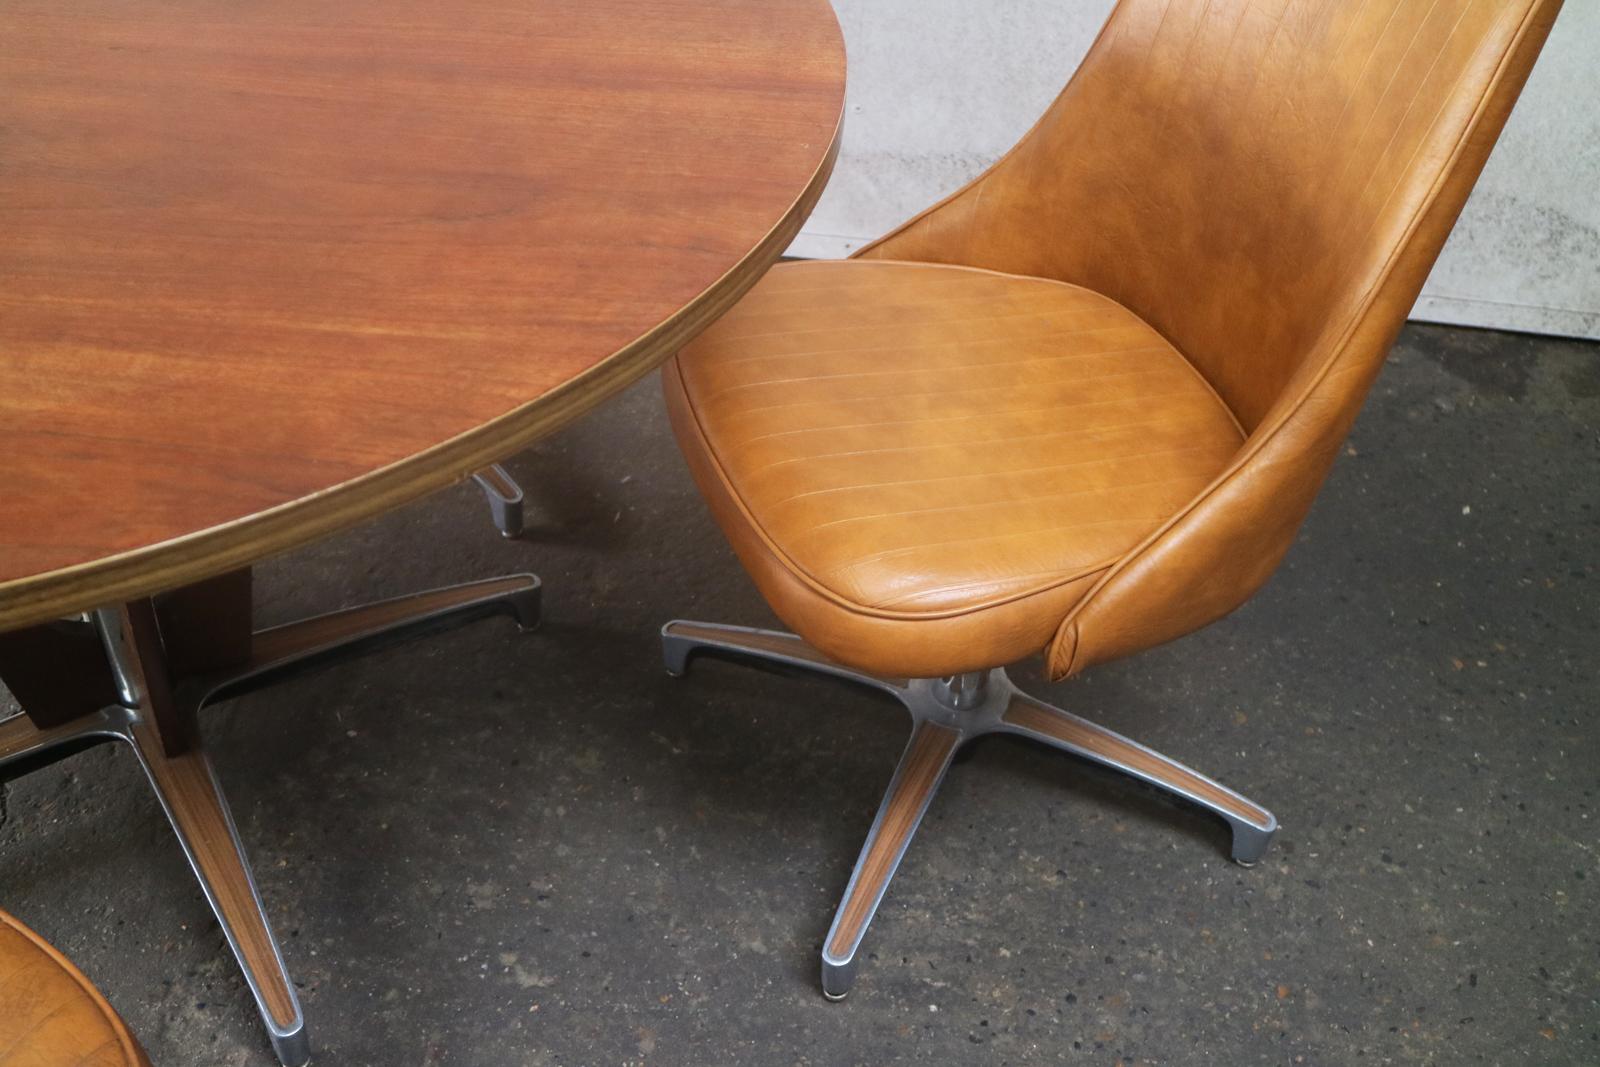 Ideal as for dining set or for meetings, designed for Chromcraft Inc, Mississippi by Vladimir Kagan, the Sculpta series was range of dining room and living room furniture that had the futuristic feel of Mid-1960s American design.
The sculpta dining